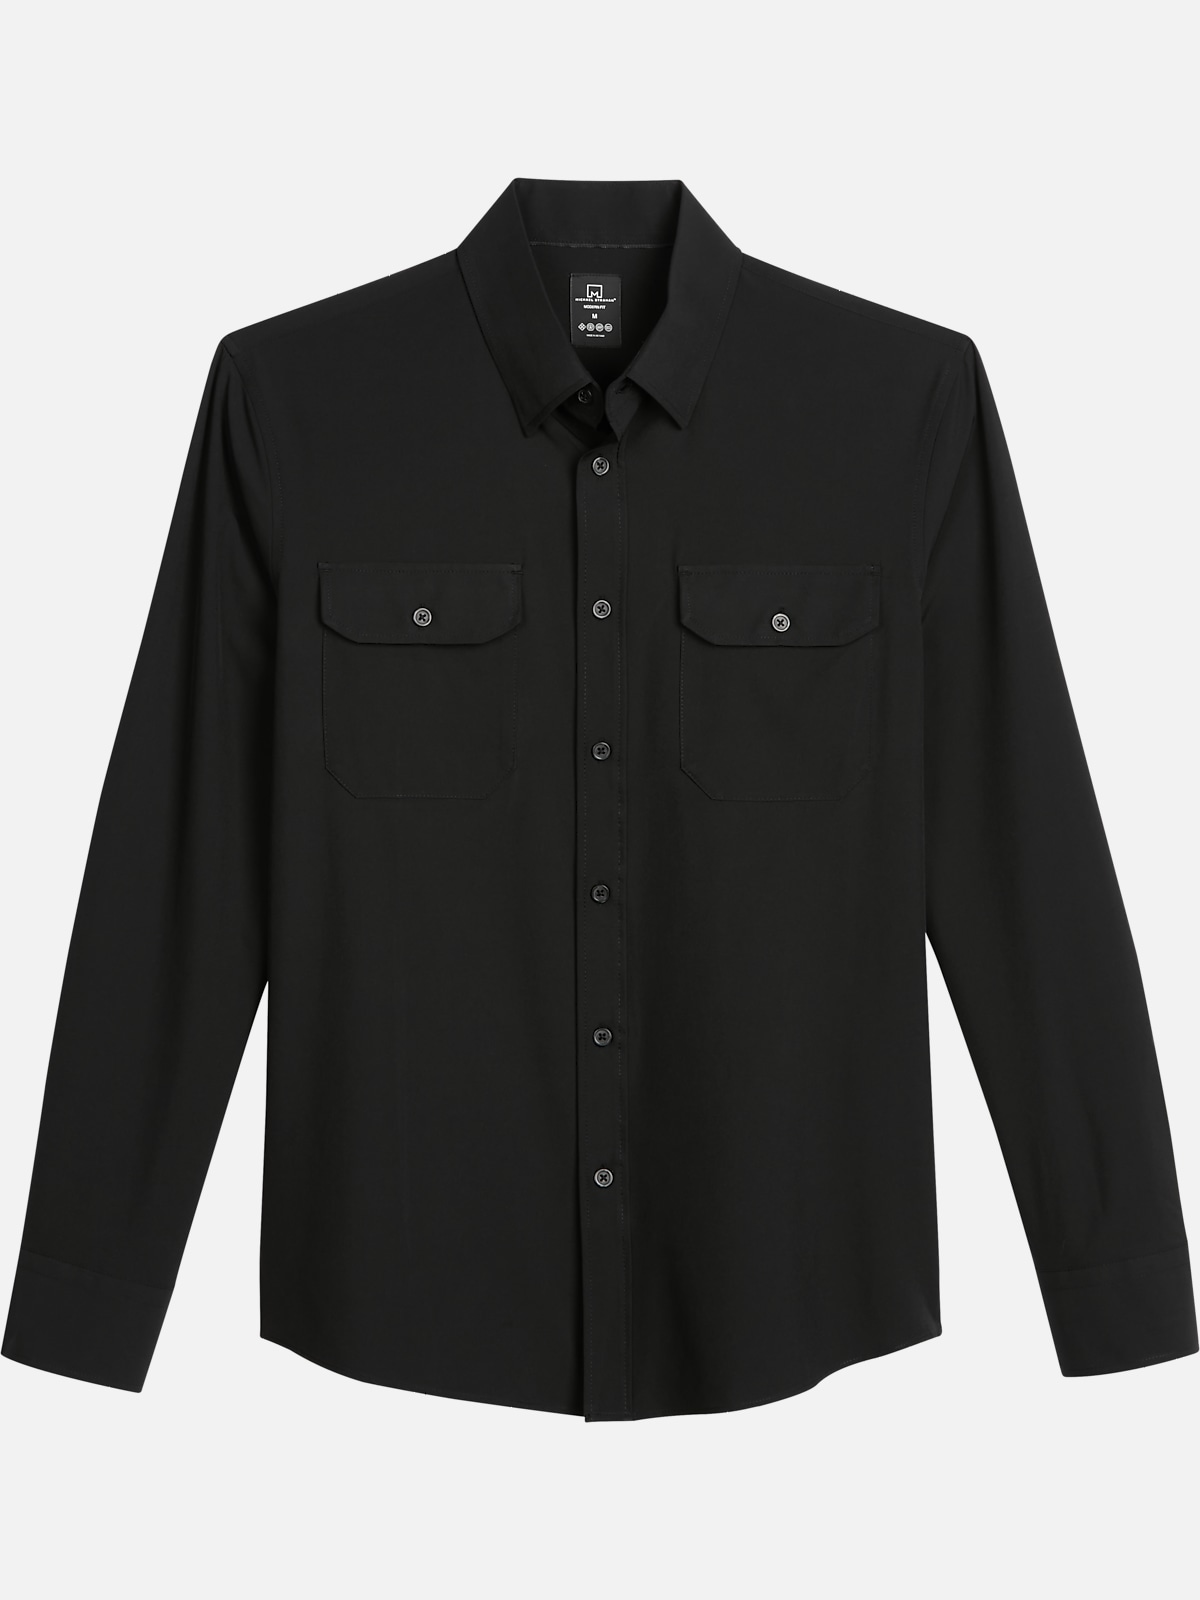 Michael Strahan Modern Fit 4 Way Stretch Long Sleeve Sport Shirt New Arrivals Mens Wearhouse 